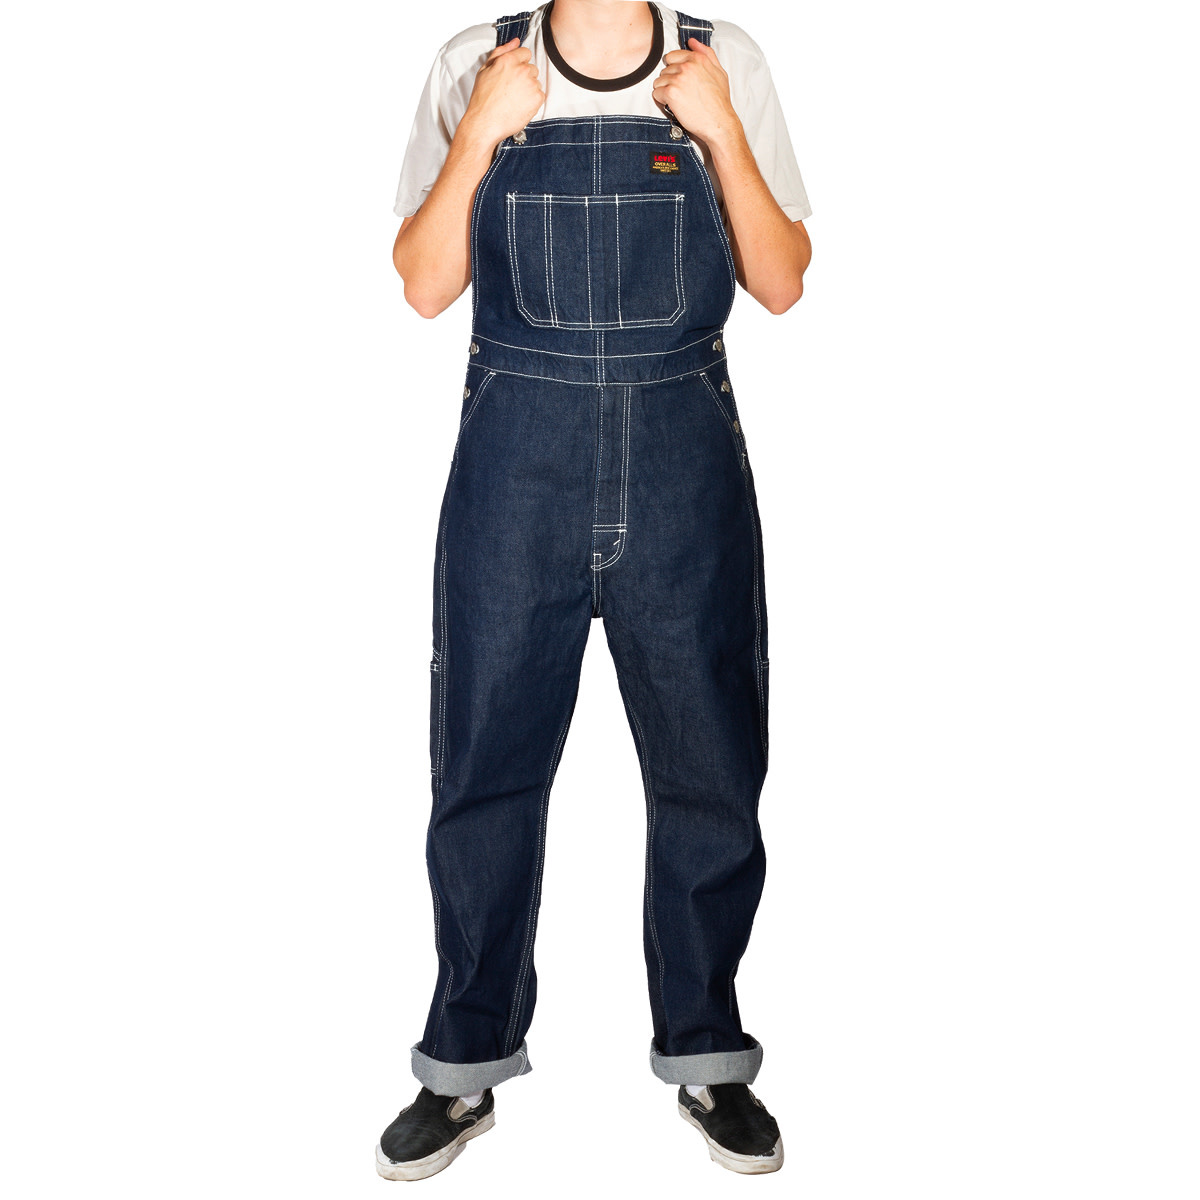 overall jeans mens levis